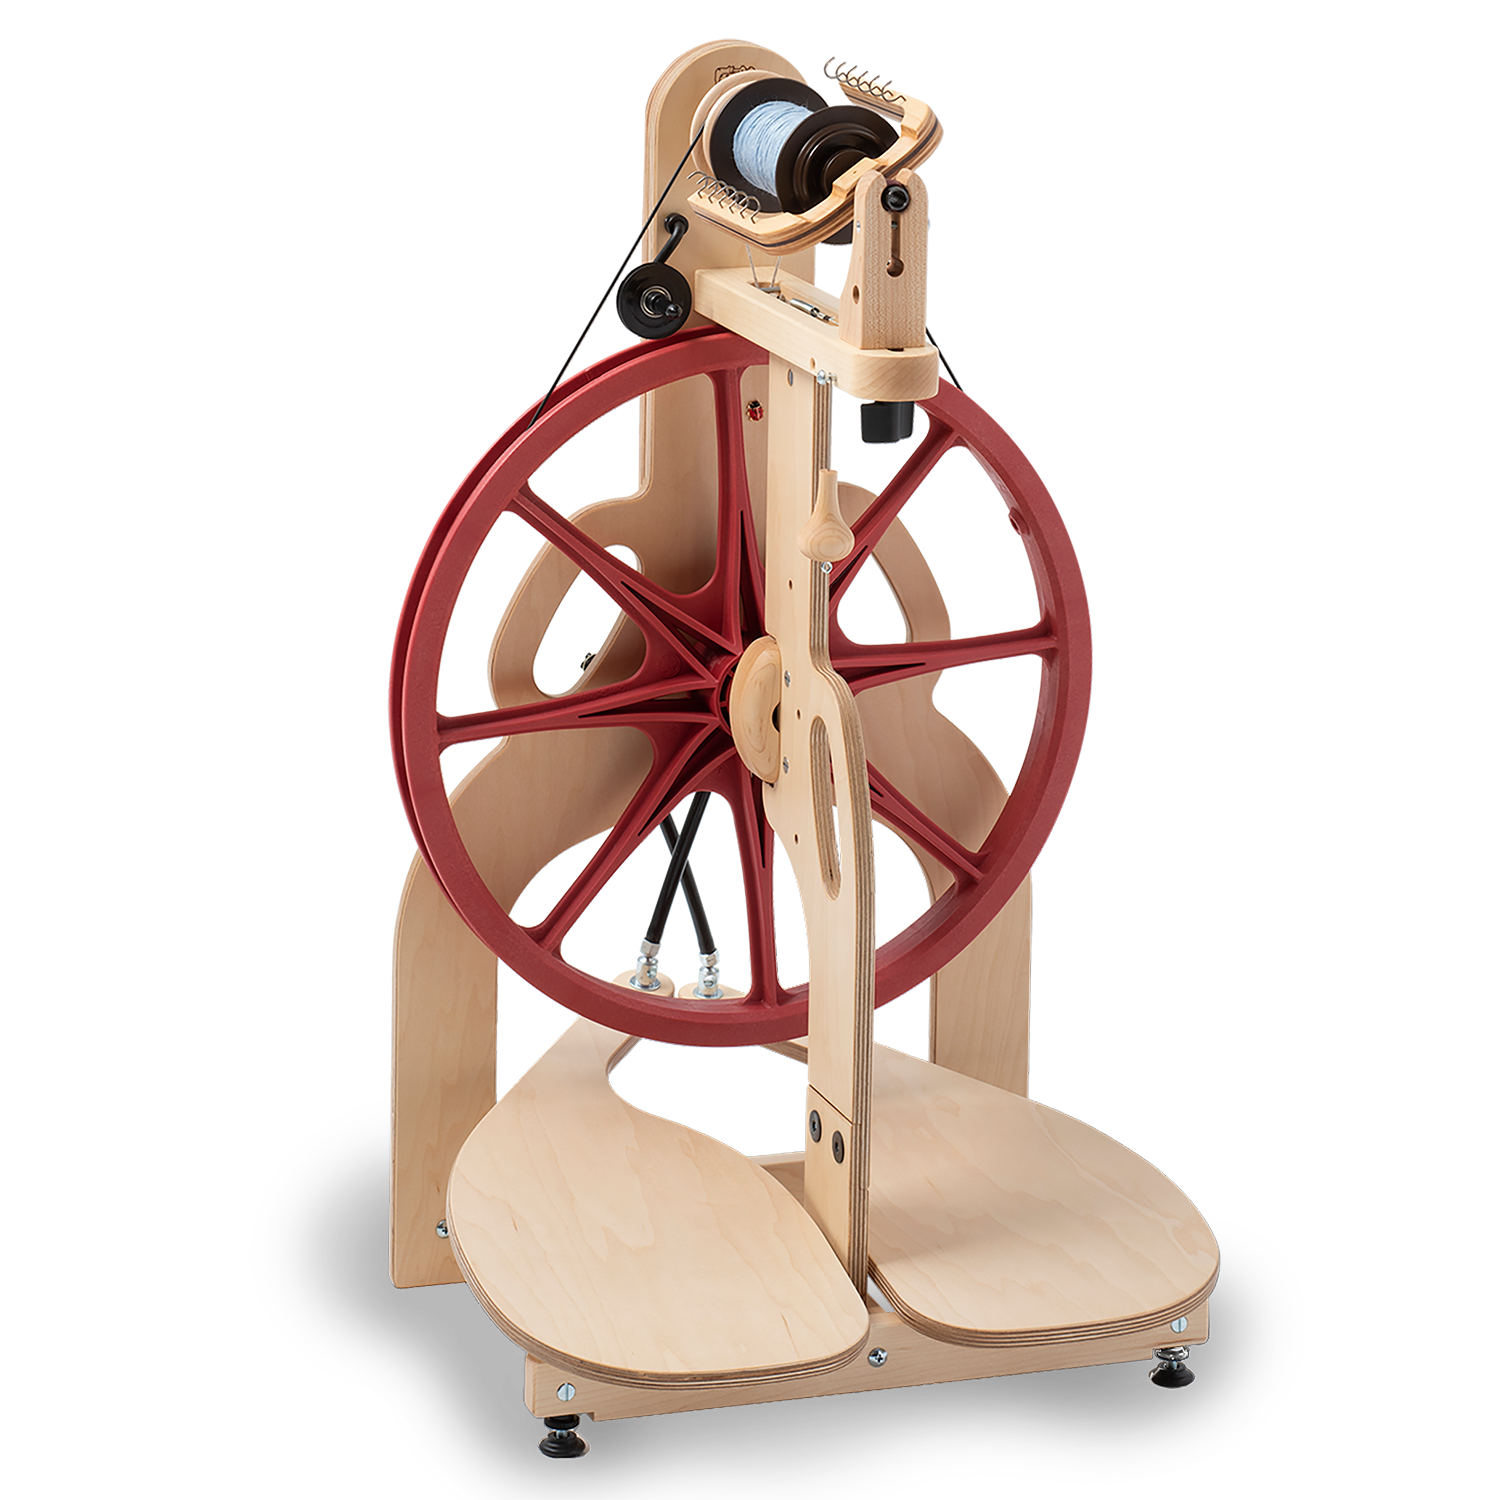 Ladybug Spinning Wheel – Schacht Spindle Company